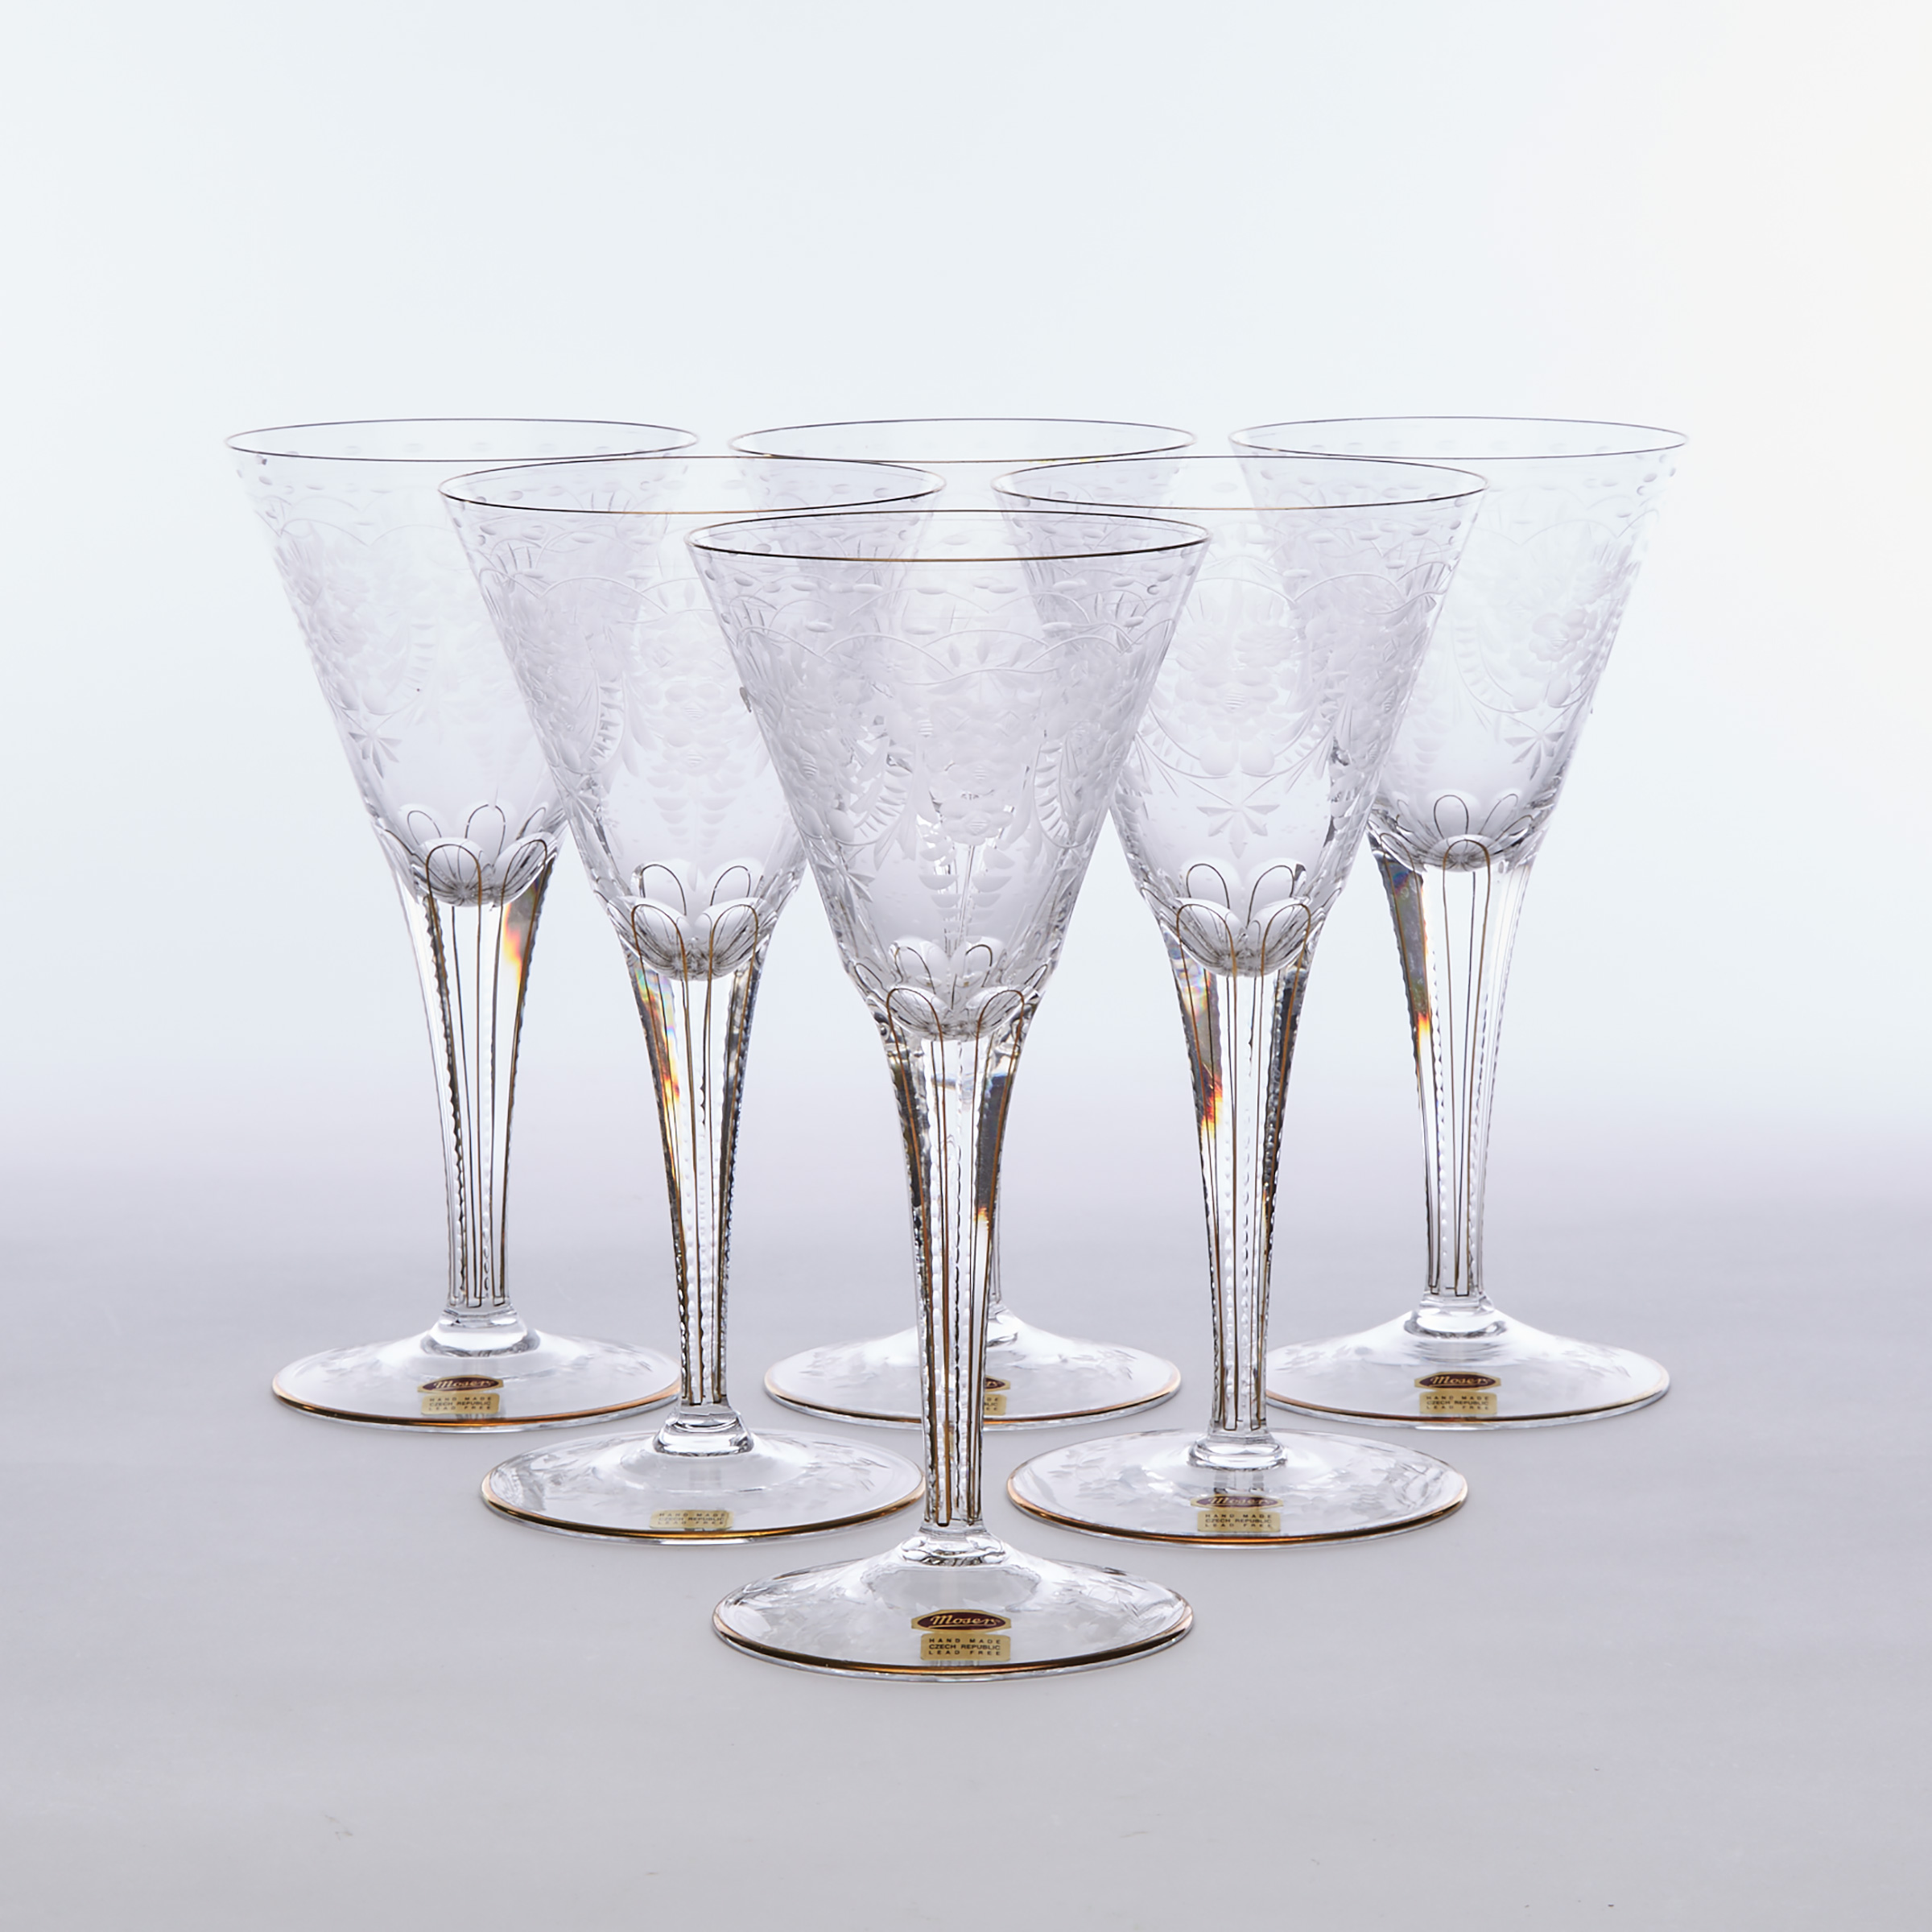 Six Moser 'Maharani' Etched and Gilt Glass Goblets, 20th century